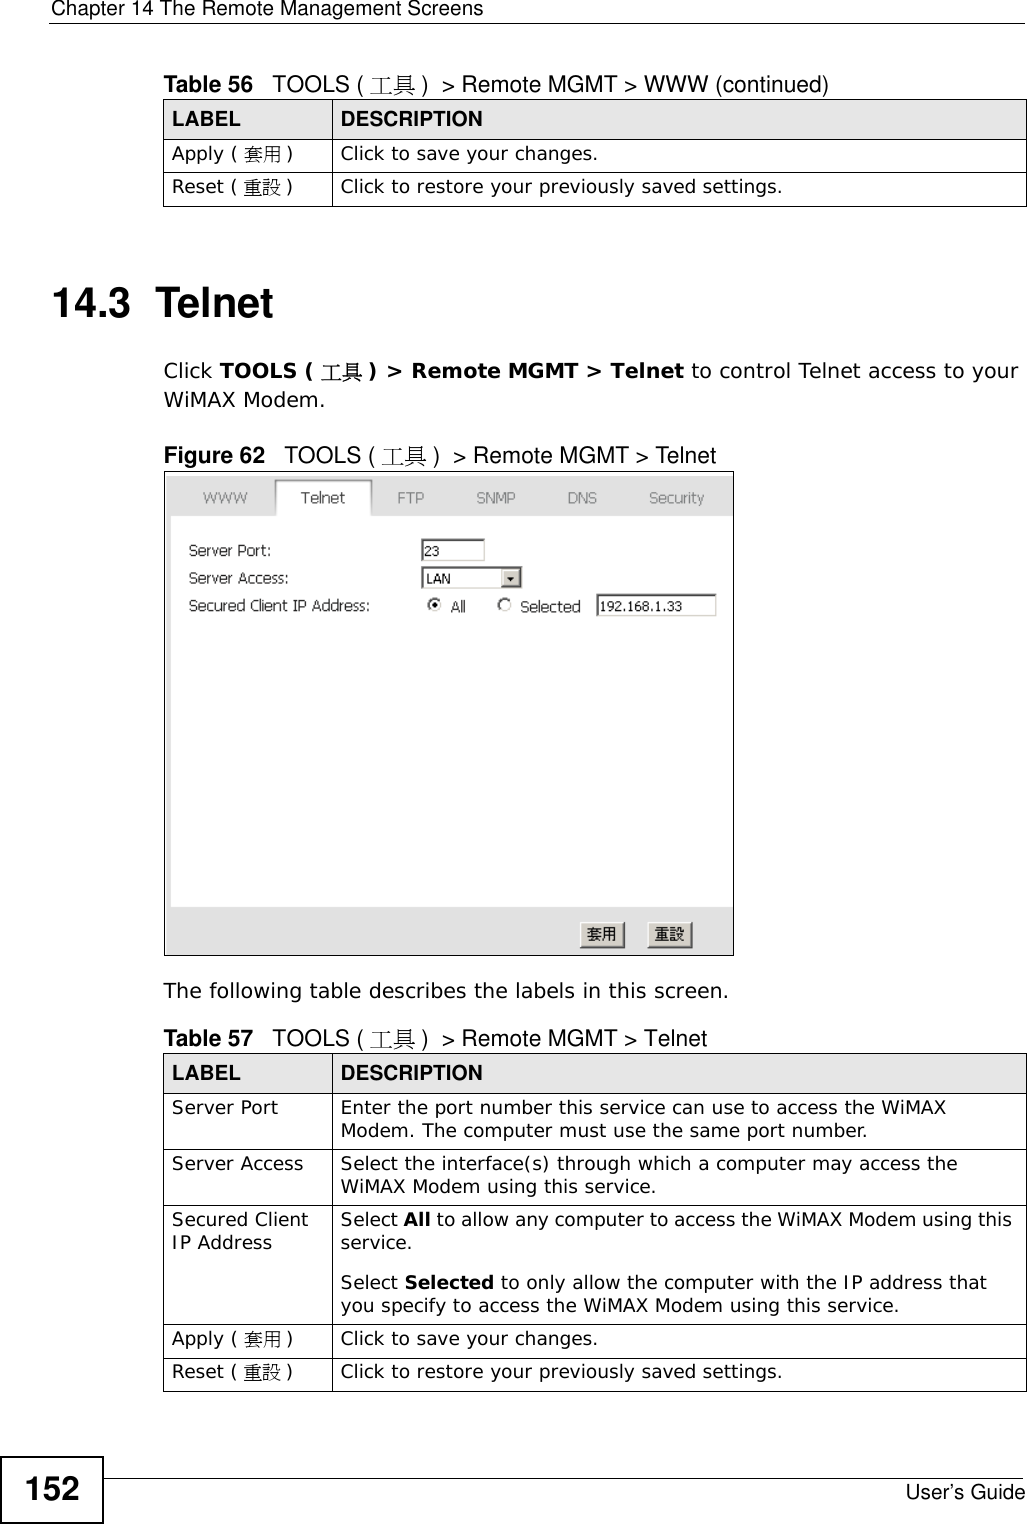 Chapter 14 The Remote Management ScreensUser’s Guide15214.3  TelnetClick TOOLS ( 工具 ) &gt; Remote MGMT &gt; Telnet to control Telnet access to your WiMAX Modem.Figure 62   TOOLS ( 工具 )  &gt; Remote MGMT &gt; TelnetThe following table describes the labels in this screen.Apply ( 套用 )Click to save your changes.Reset ( 重設 )Click to restore your previously saved settings.Table 56   TOOLS ( 工具 )  &gt; Remote MGMT &gt; WWW (continued)LABEL DESCRIPTIONTable 57   TOOLS ( 工具 )  &gt; Remote MGMT &gt; TelnetLABEL DESCRIPTIONServer Port Enter the port number this service can use to access the WiMAX Modem. The computer must use the same port number.Server Access Select the interface(s) through which a computer may access the WiMAX Modem using this service.Secured Client IP Address Select All to allow any computer to access the WiMAX Modem using this service.Select Selected to only allow the computer with the IP address that you specify to access the WiMAX Modem using this service.Apply ( 套用 )Click to save your changes.Reset ( 重設 )Click to restore your previously saved settings.